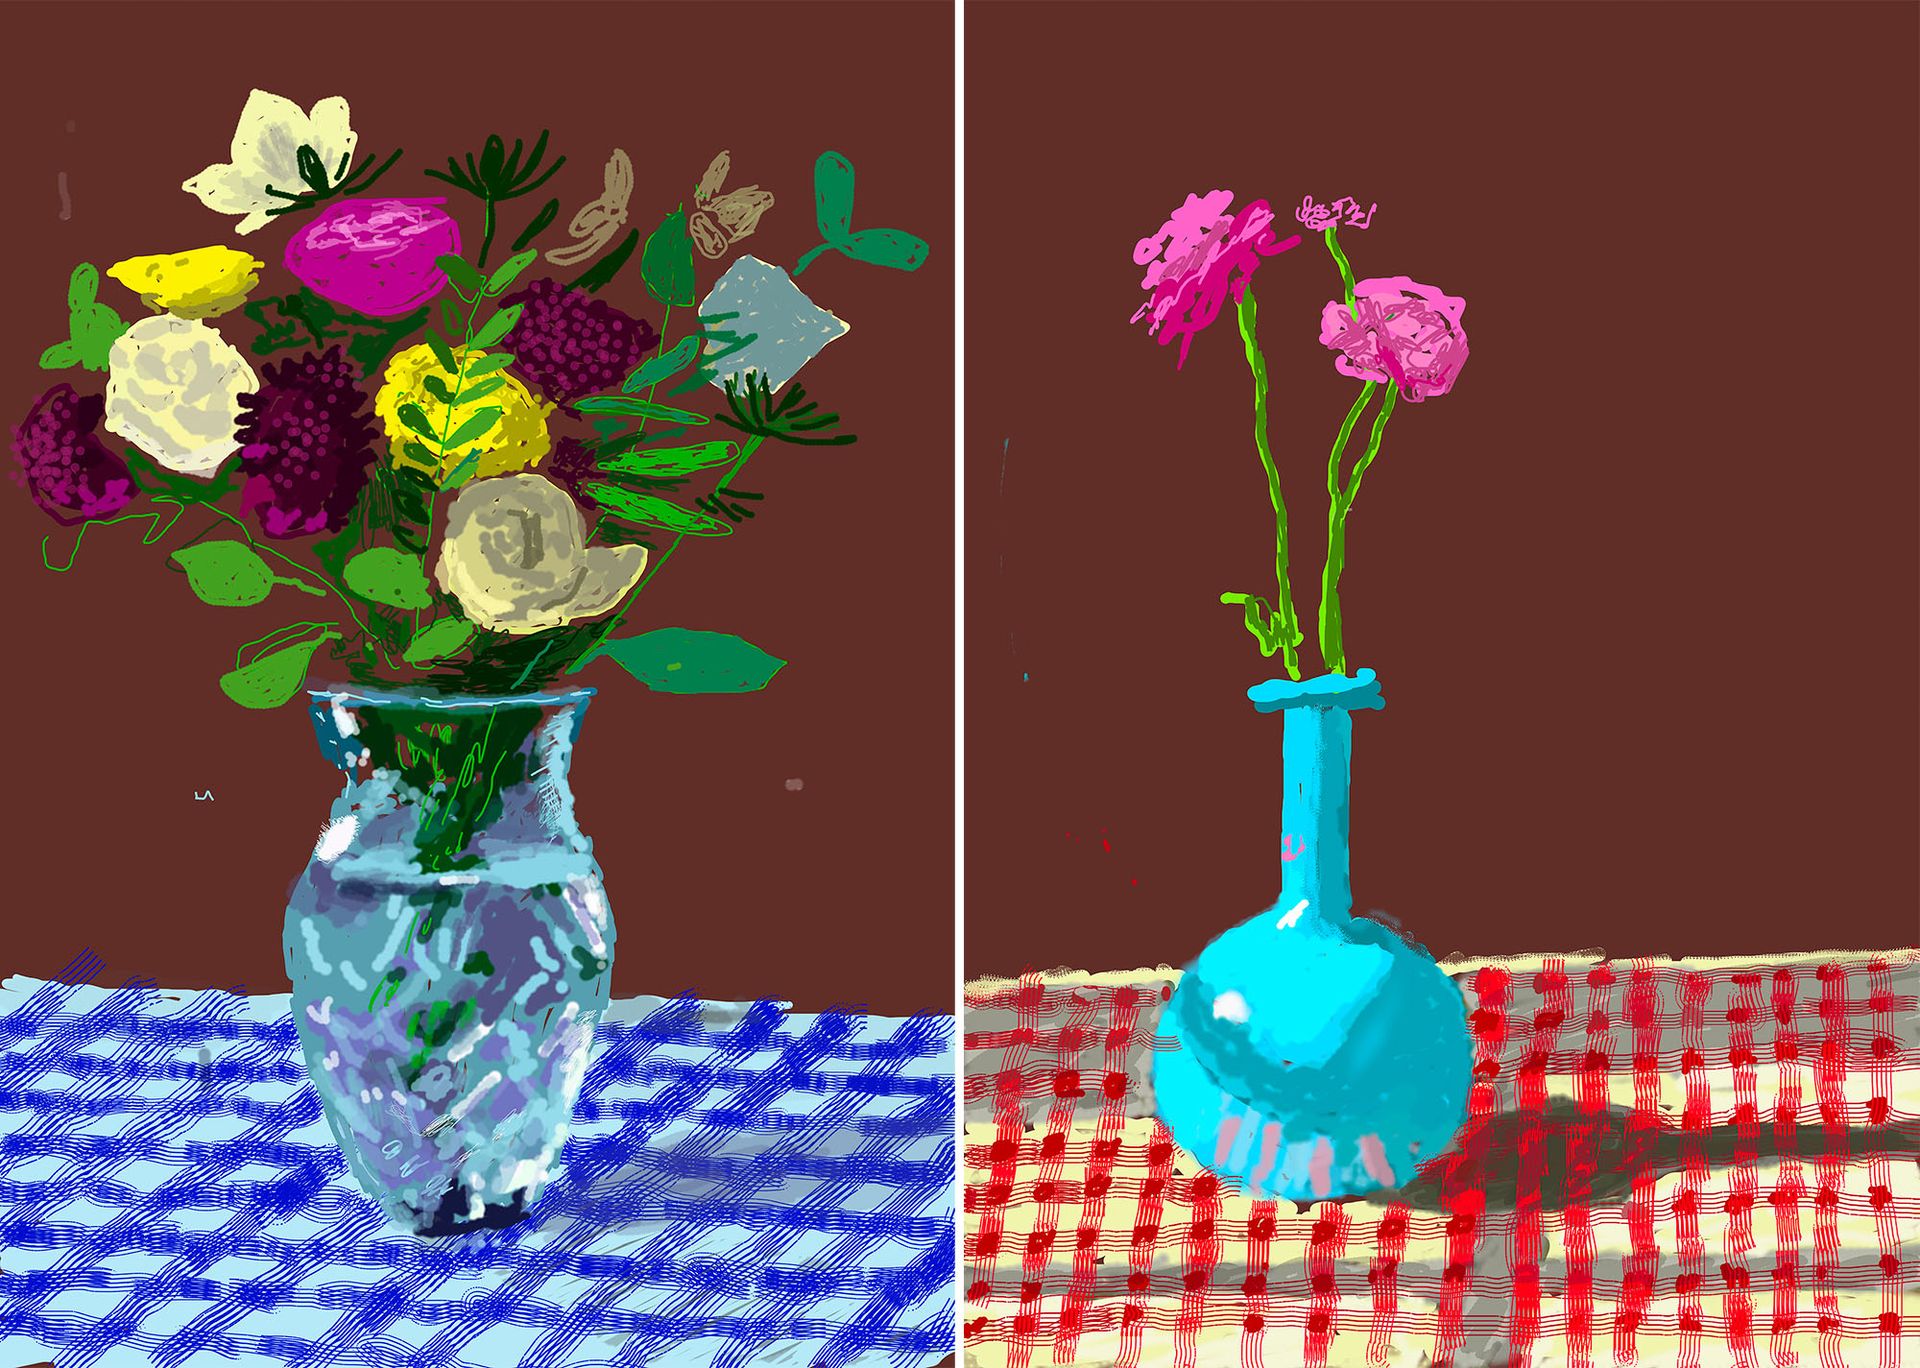 David Hockney’s latest floral iPad works to blossom at five different